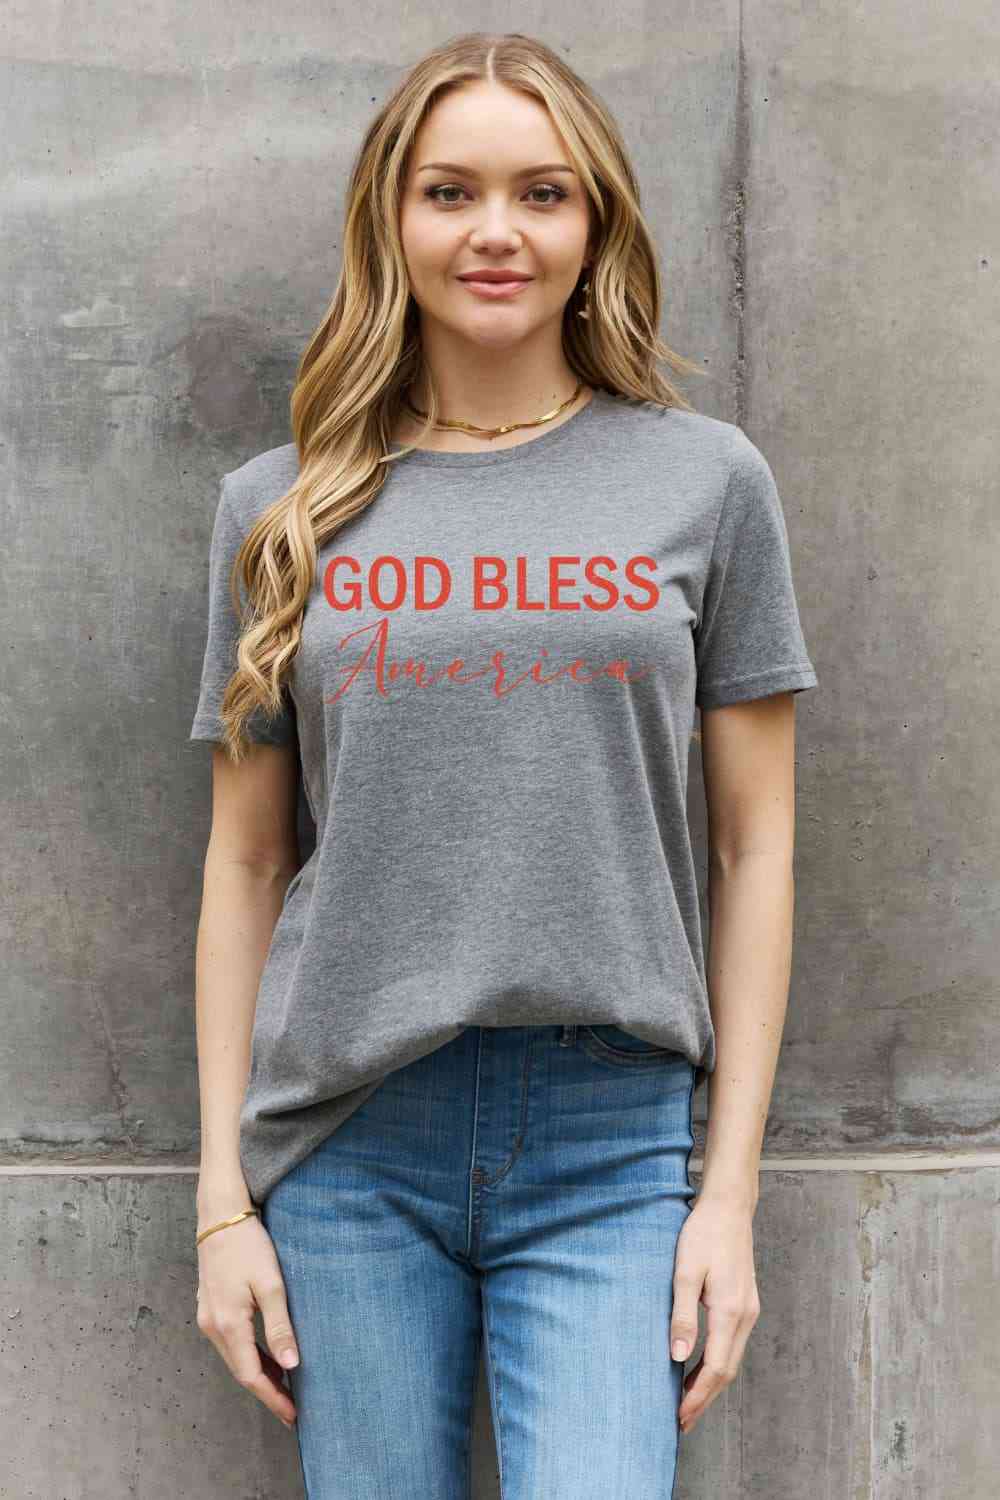 Simply Love GOD BLESS AMERICA Graphic Cotton Tee   